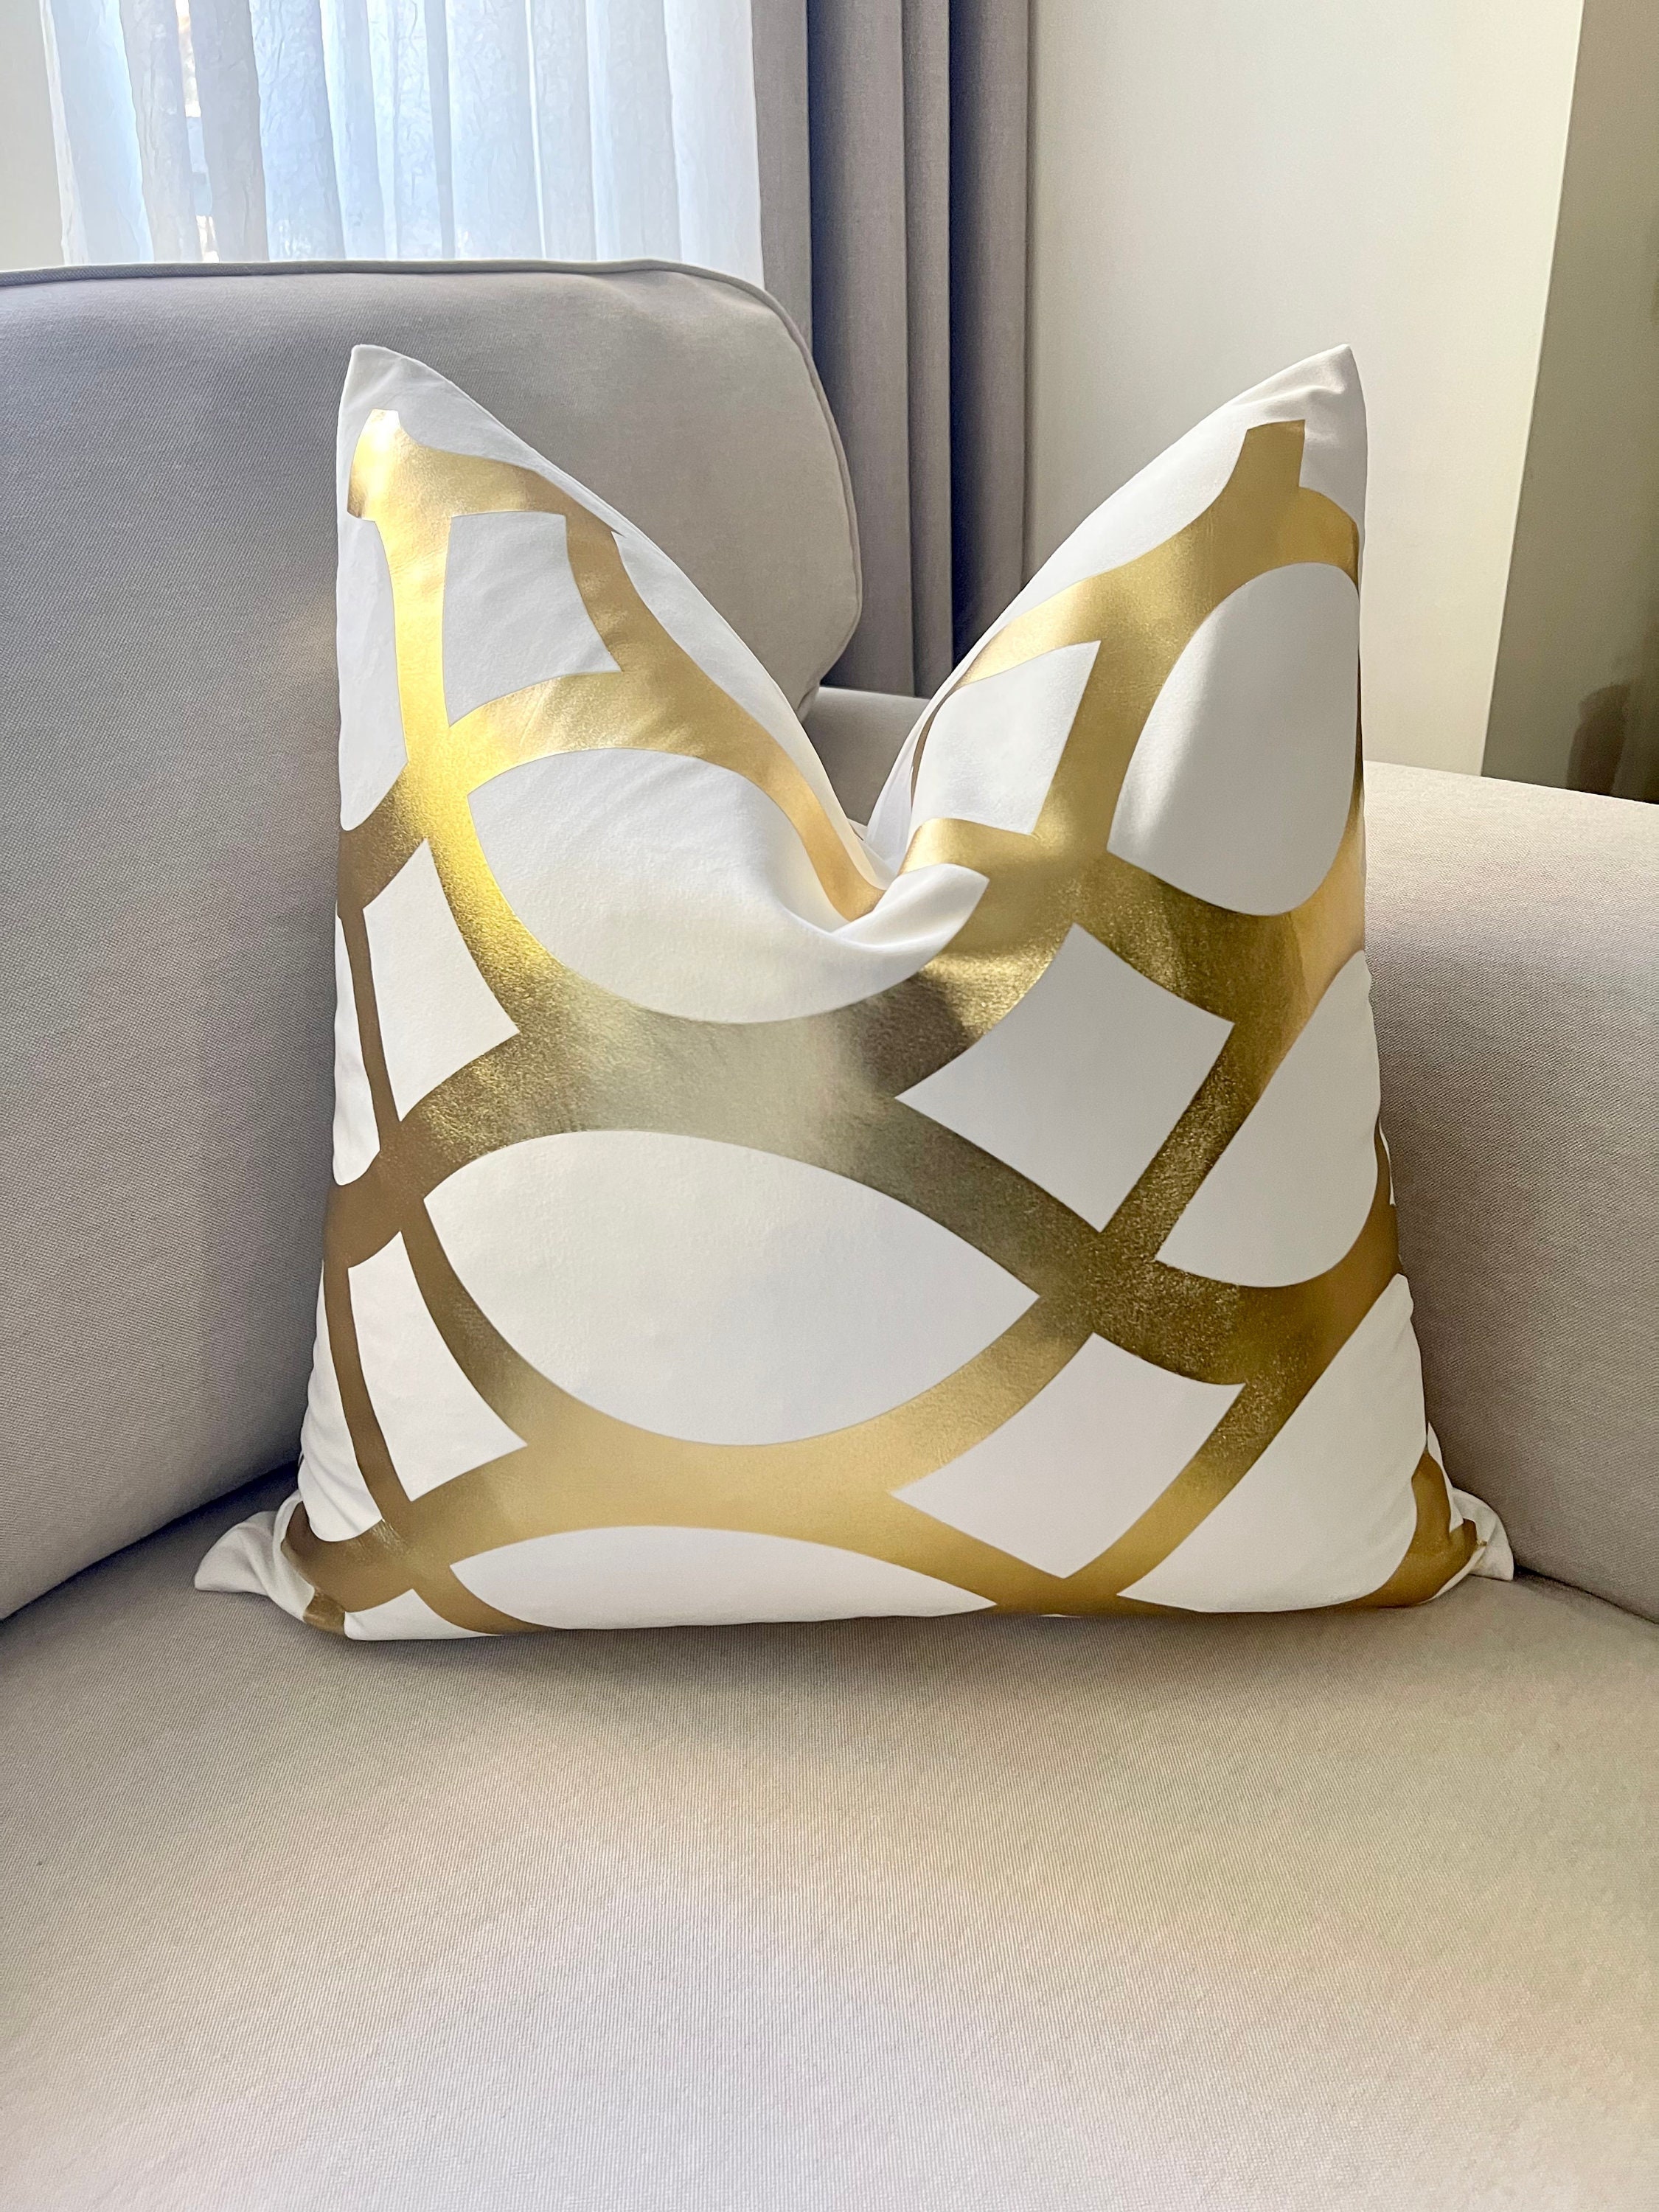 Luxor Gold Metallic Foil Throw Pillow, 18, Sold by at Home